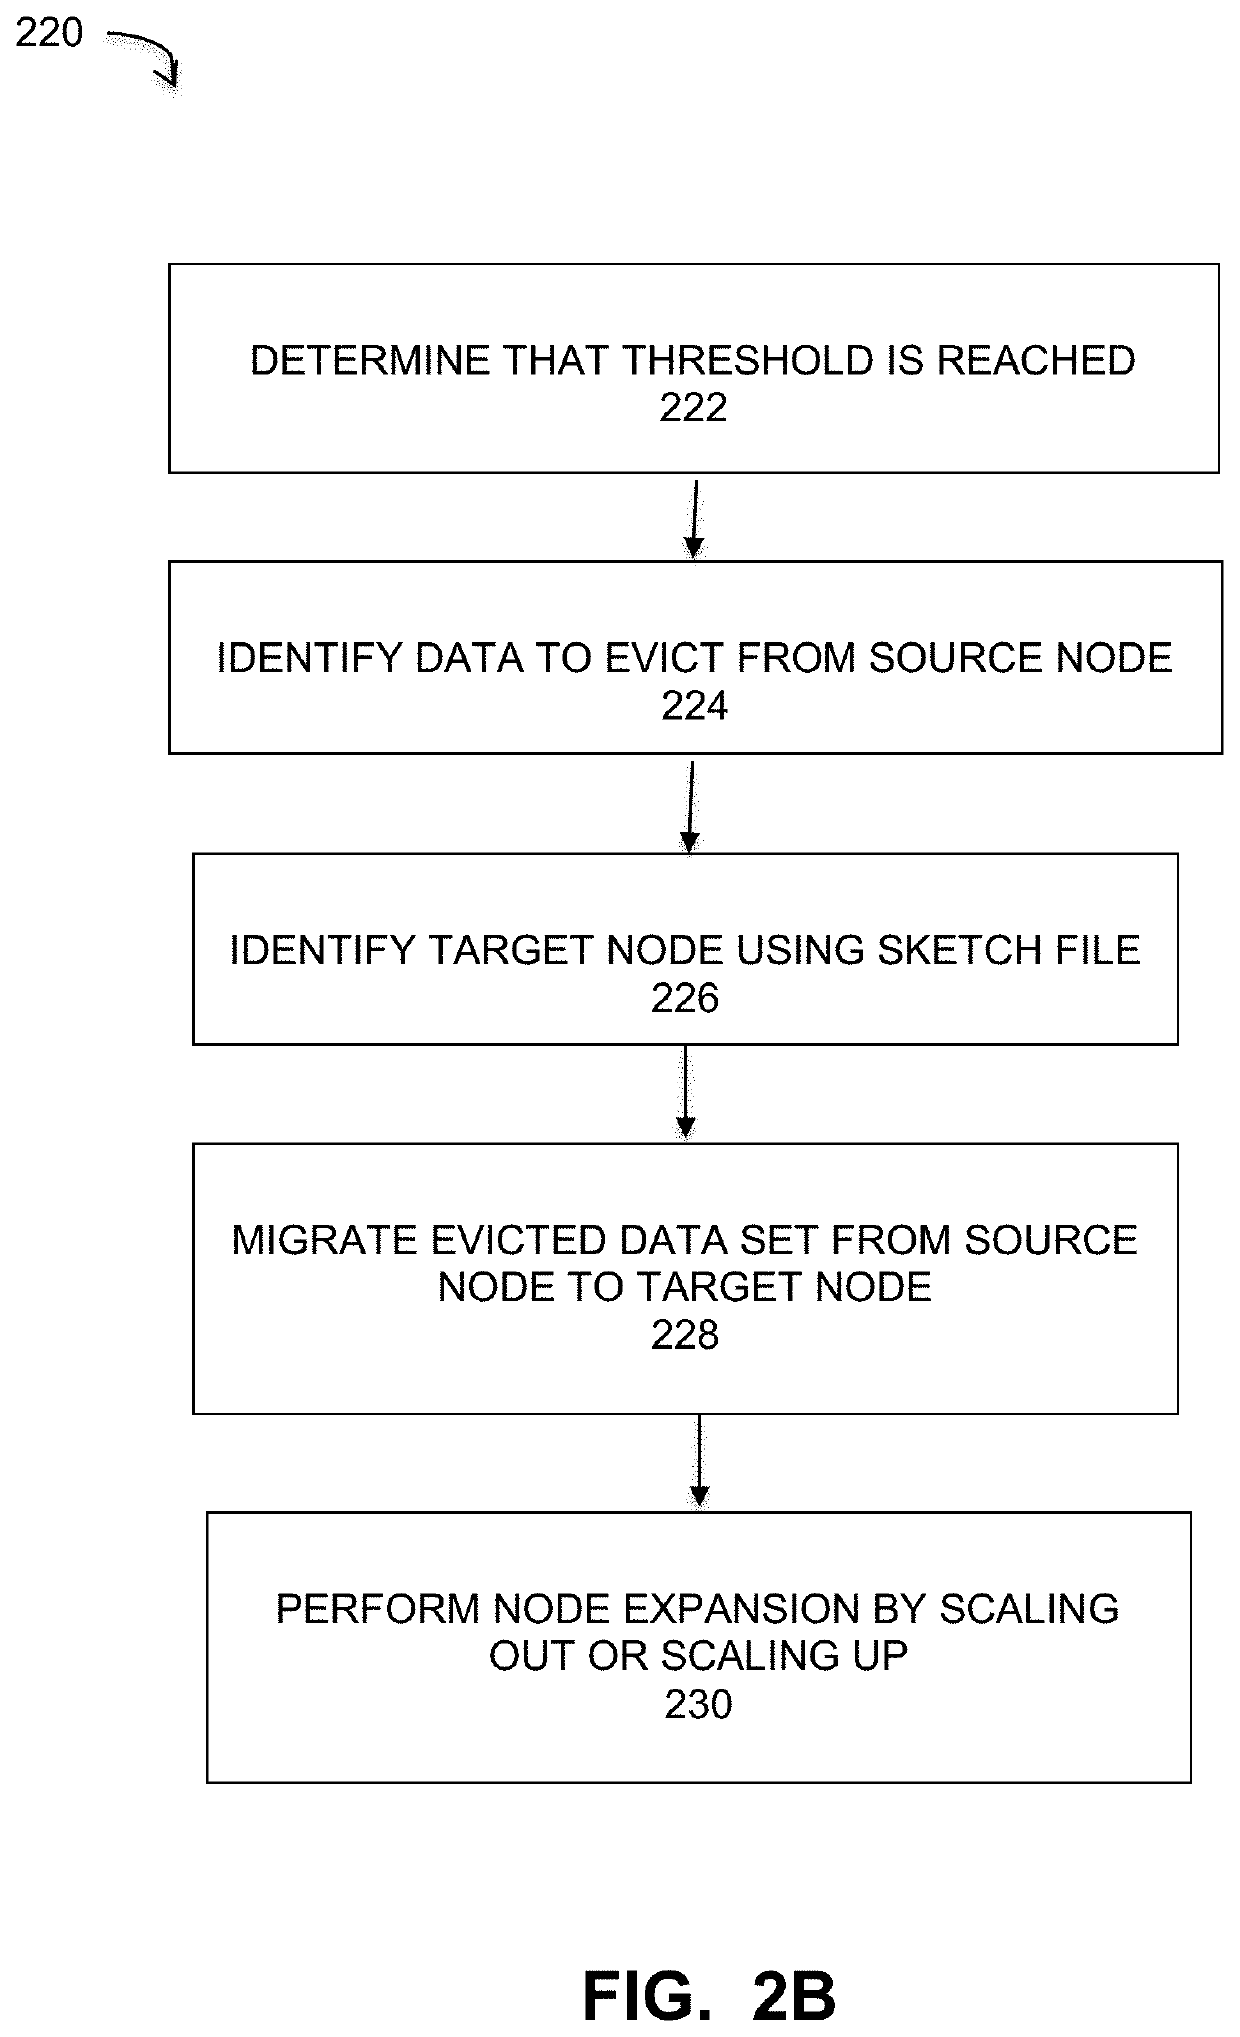 Scale out capacity load-balancing for backup appliances